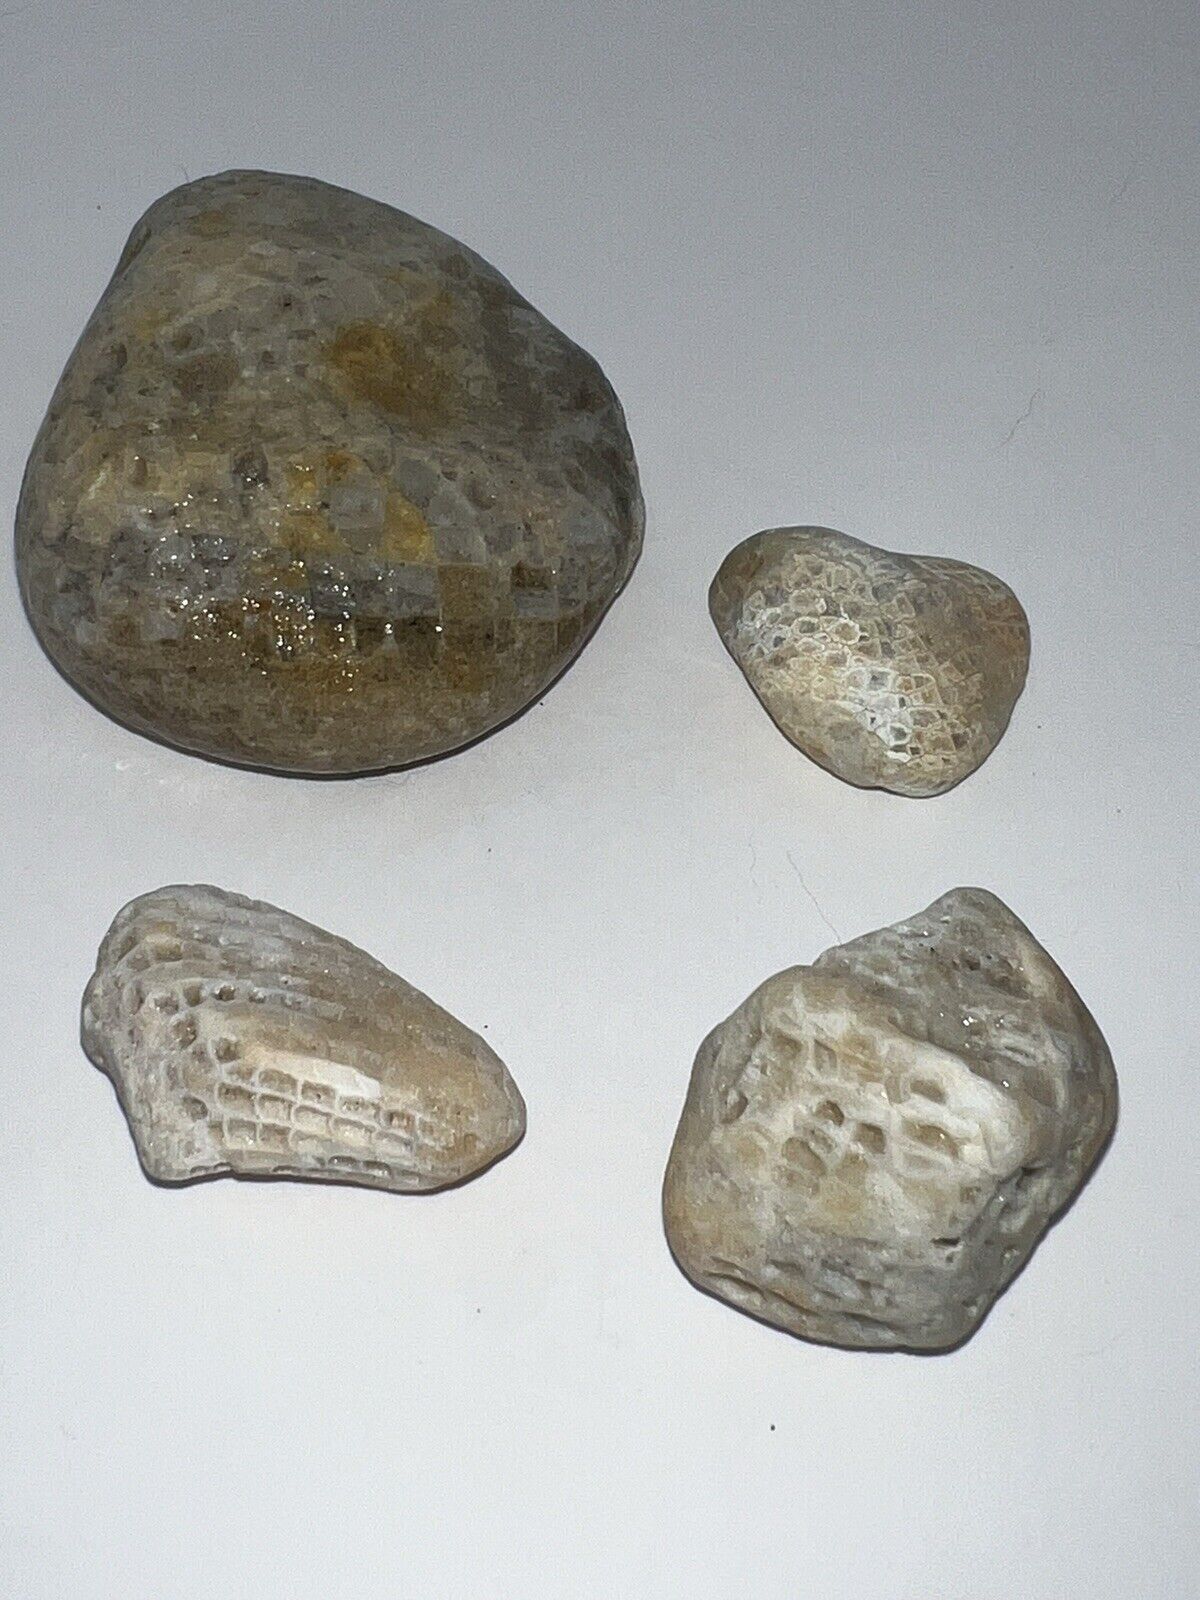 Charlevoix Honeycomb Fossil Lot Of 4 Fossils 4.96 Oz - S33